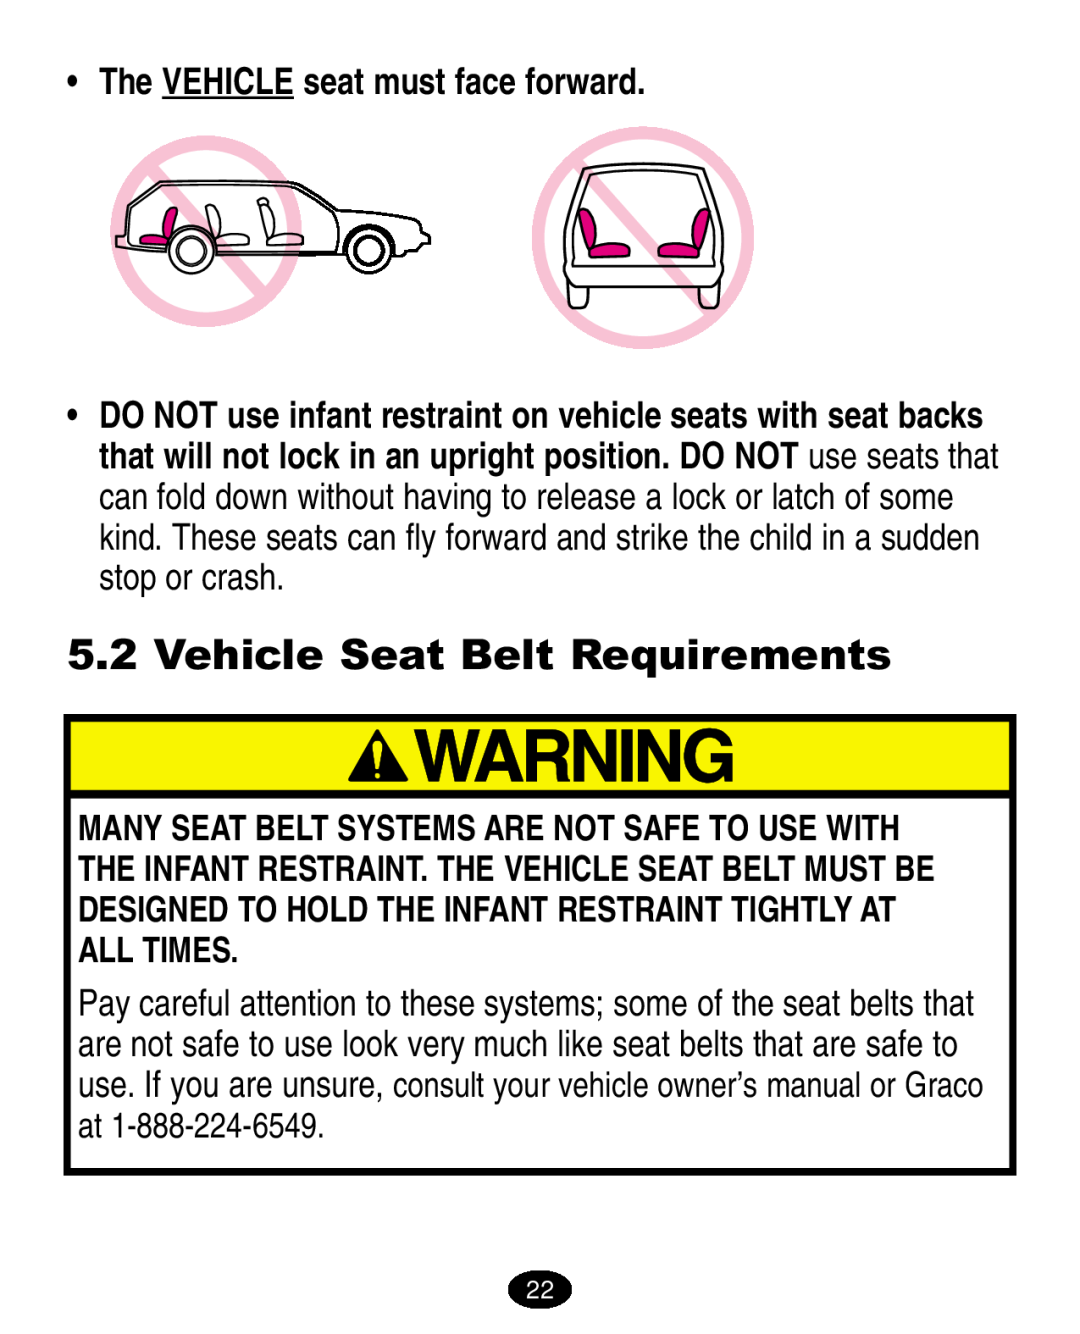 Graco ISPA005AA manual Vehicle Seat Belt Requirements, The VEHICLE seat must face forward 